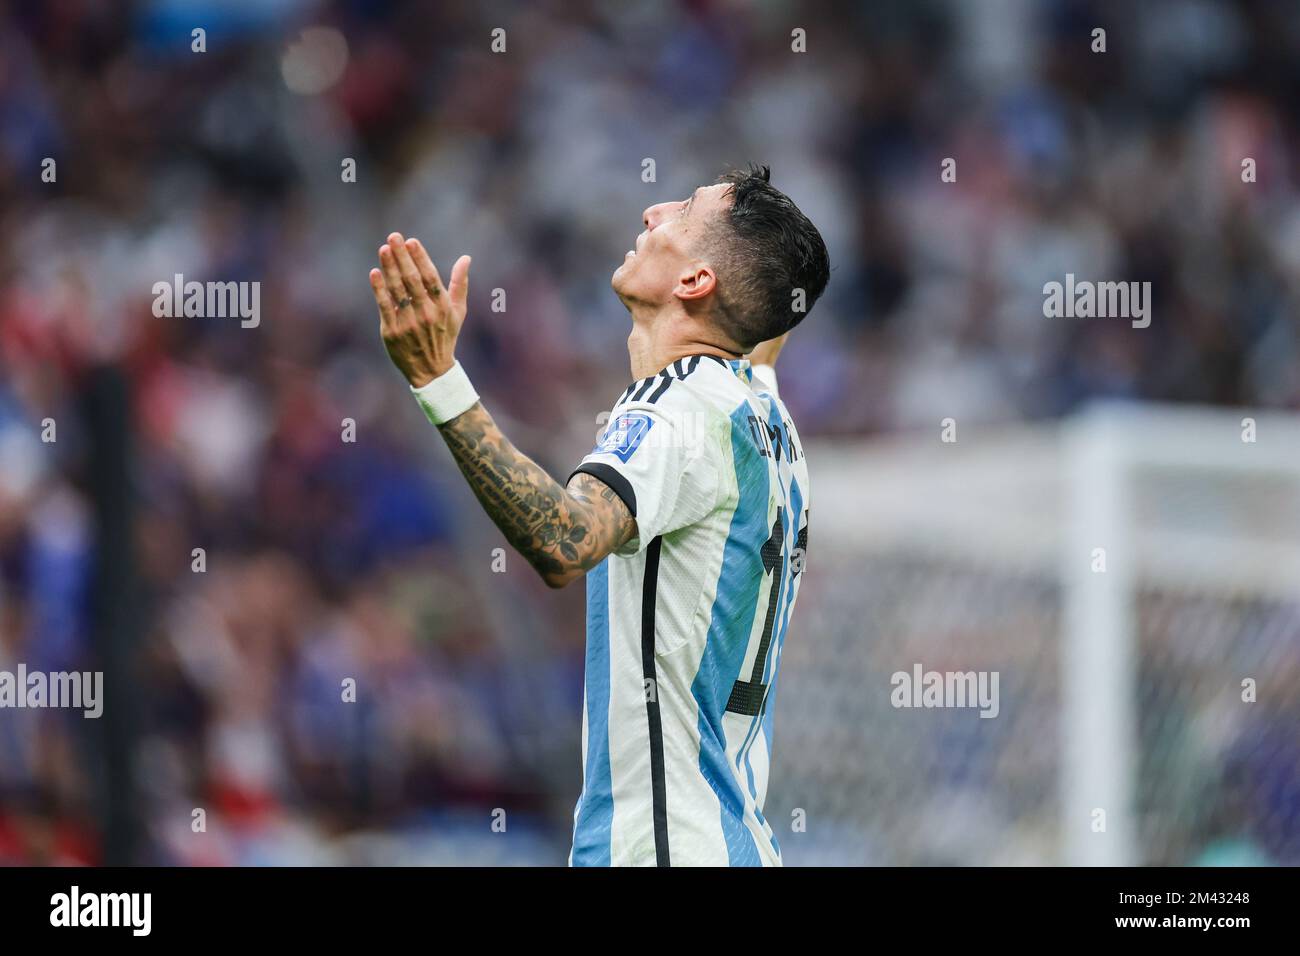 Doha, Qatar. 18th Dec, 2022. Ángel Di María Argentina player during a match against France valid for the Final World Cup in Qatar at Estadio Lusail in the city of Doha in Qatar. December 18, 2022. (Photo: William Volcov) Credit: Brazil Photo Press/Alamy Live News Stock Photo